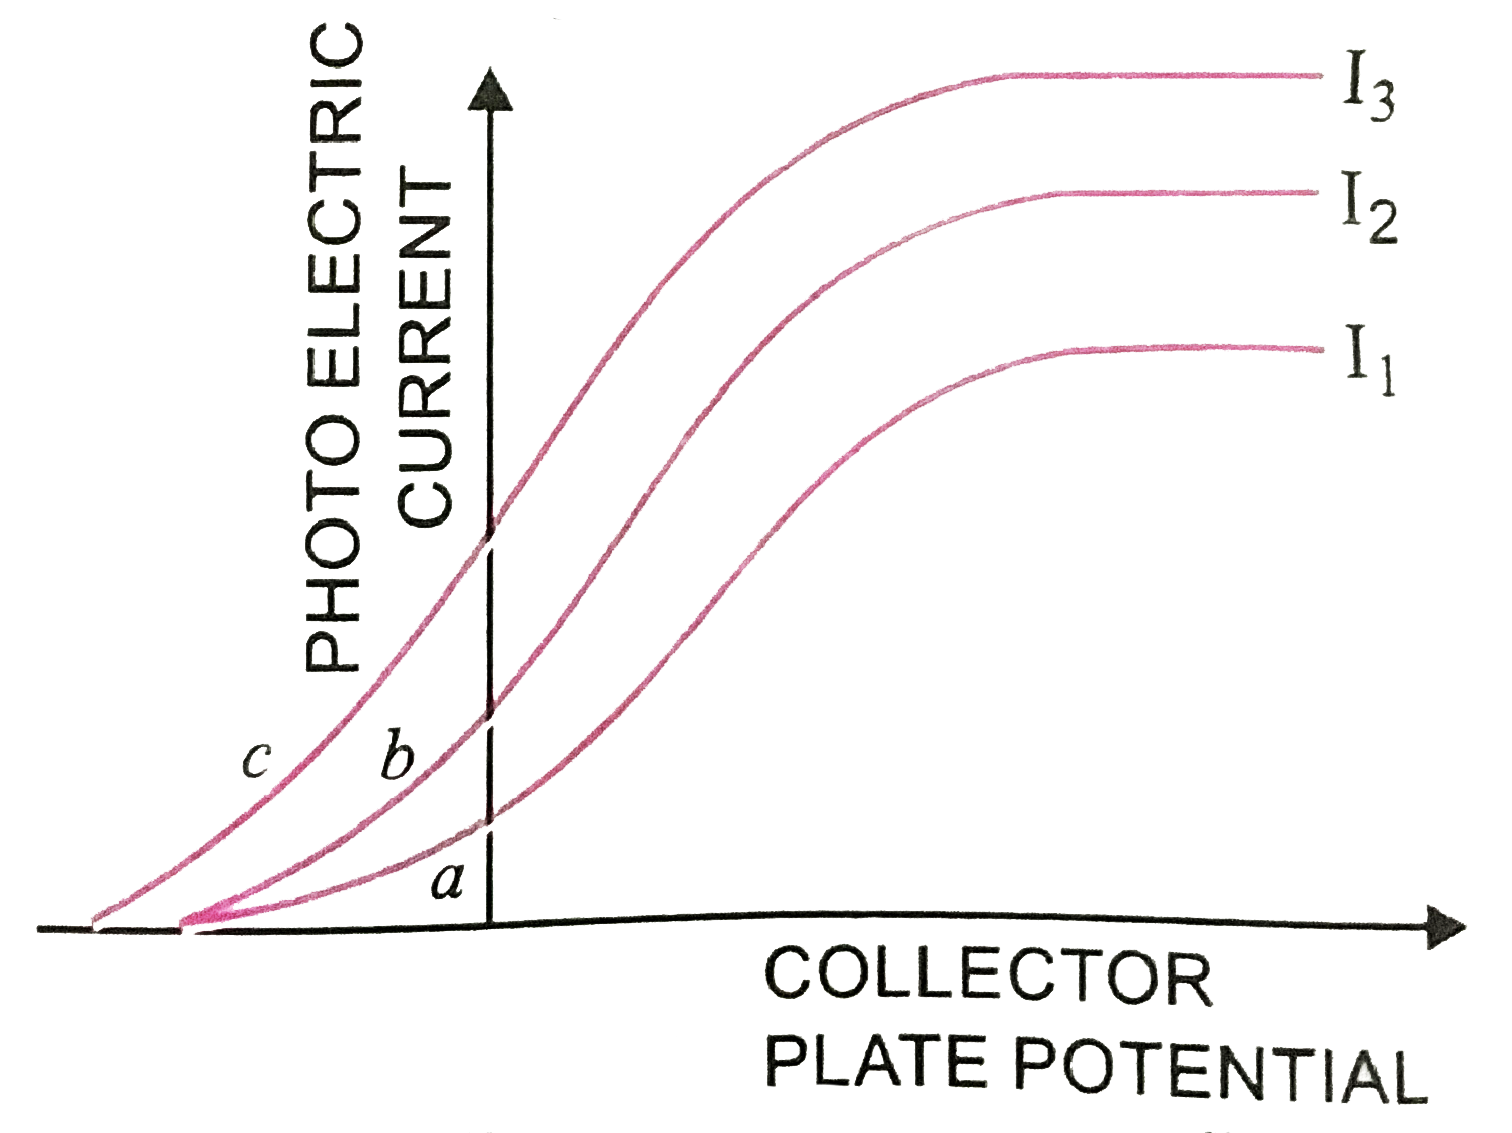 The Fig shows a plot of three curves a, b, c showing the variation of photocurrent versus collector plate potential for the different intensities I1, I2 and I3 having frequencies v1, v2 and v3 respectively, incident on a photosensitive surface. Point out the two curves for which the incident radiation have same frequency but different intensities.